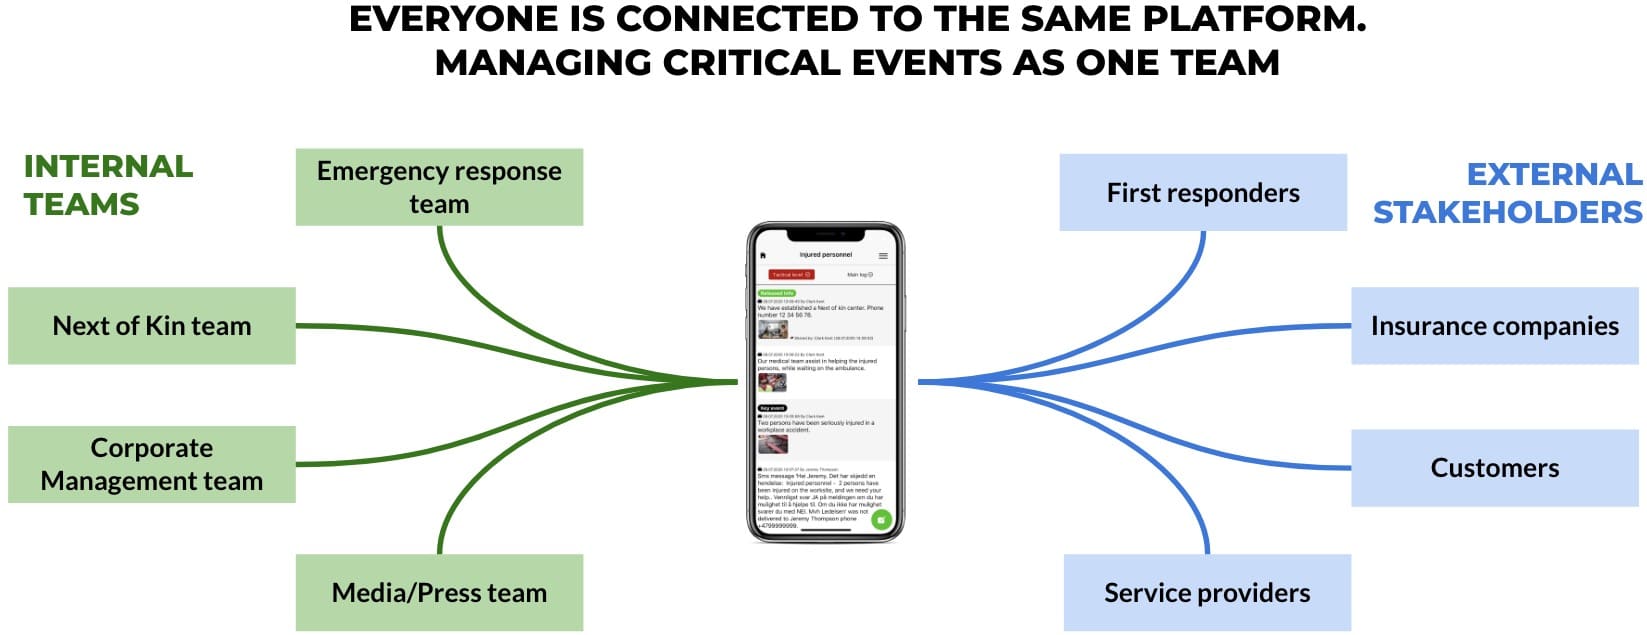 Manage critical events as one team Graphic